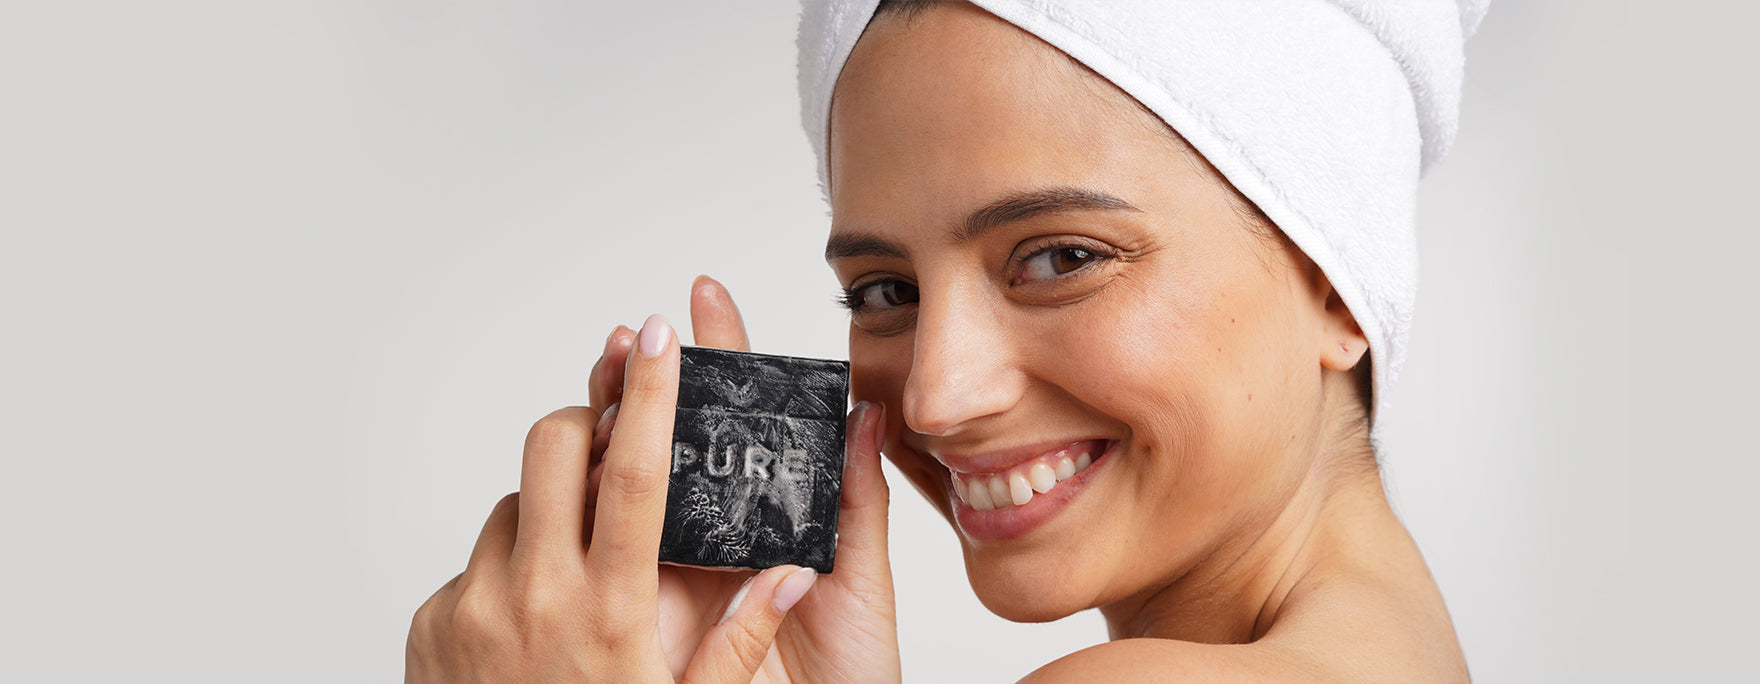 Introducing I AM PURE, the 100% Natural Facial Cleansing Bar, Created by Talia Sutra